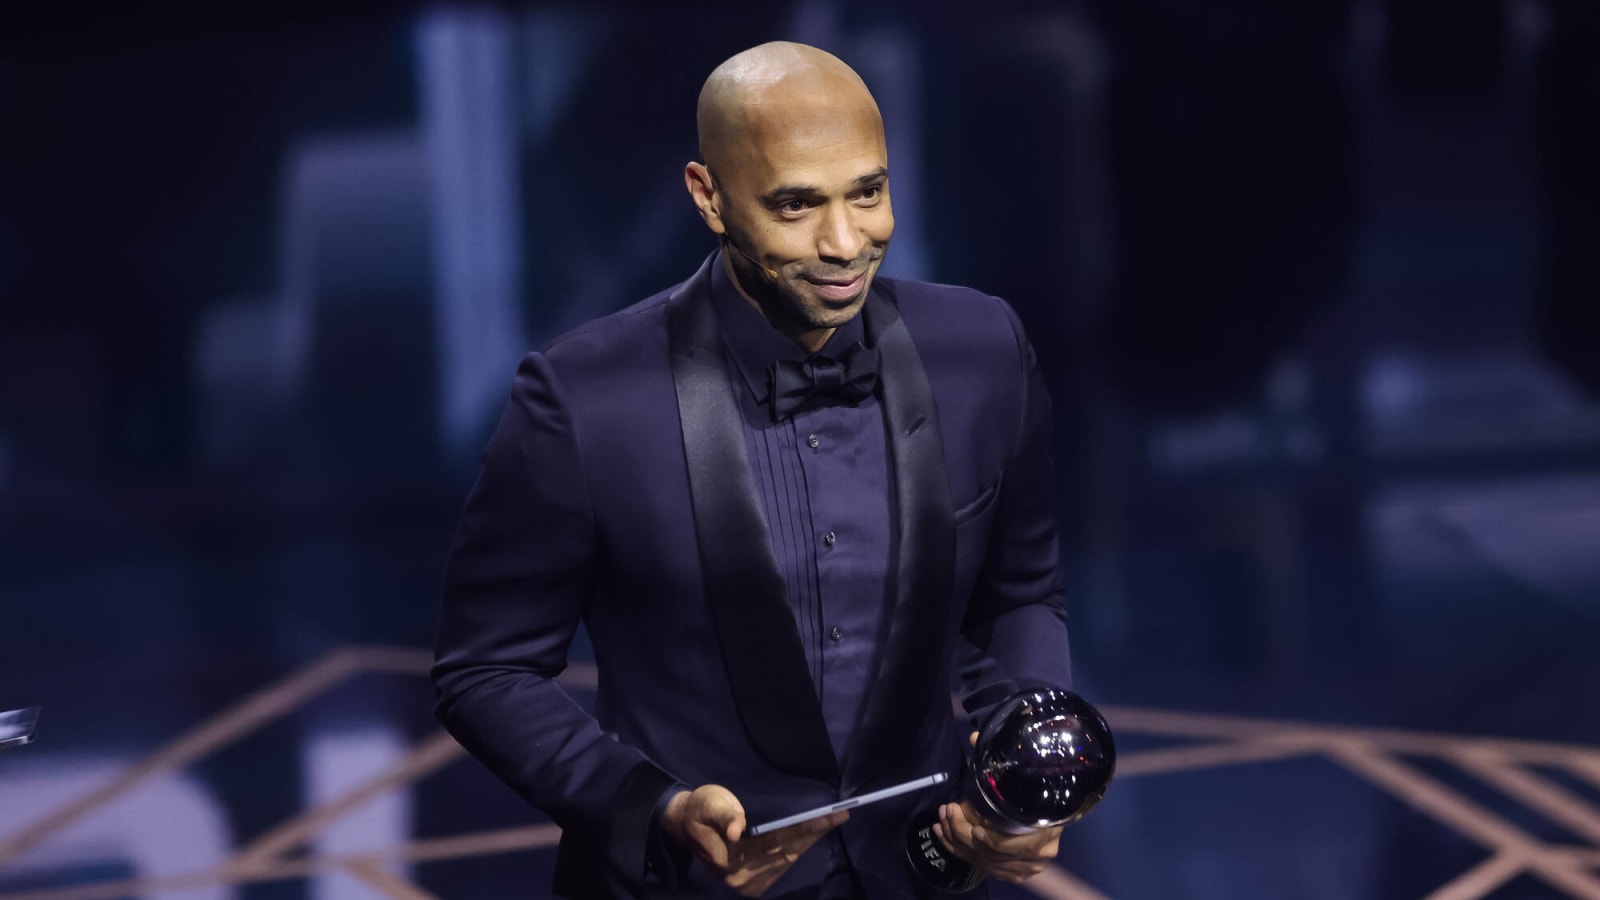 Watch: 'Don’t get your hands on trophies' – Thierry Henry roasts Tottenham at The Best FIFA awards ceremony